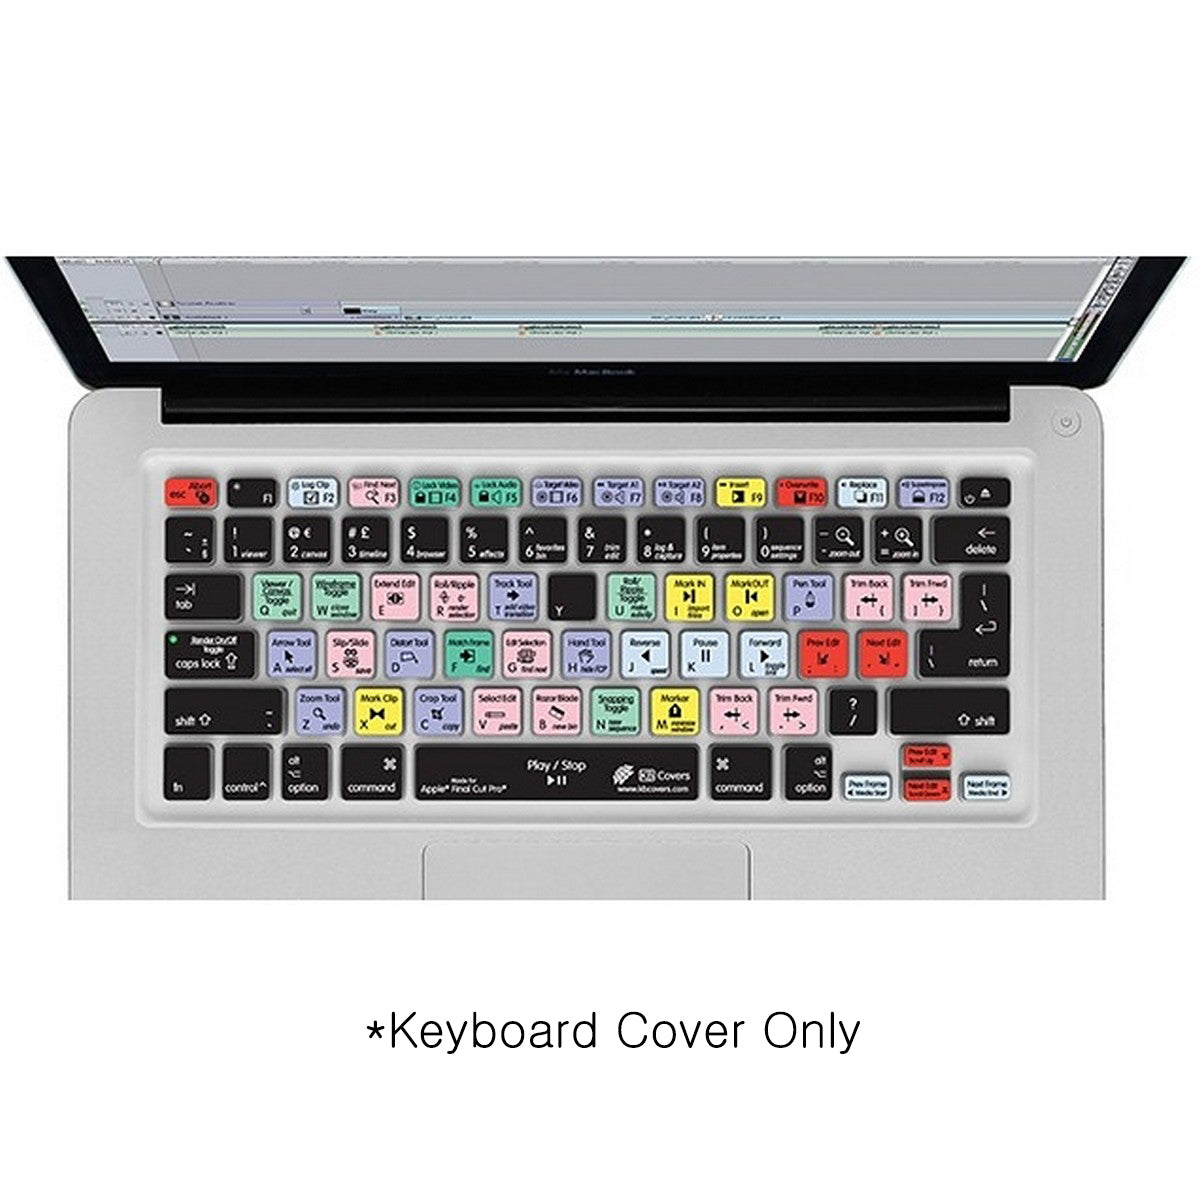 Editors Keys Final Cut Pro Version 5 6 7 Keyboard Cover | Shortcut Printed Cover for MacBook Air Pro Wireless Keyboards